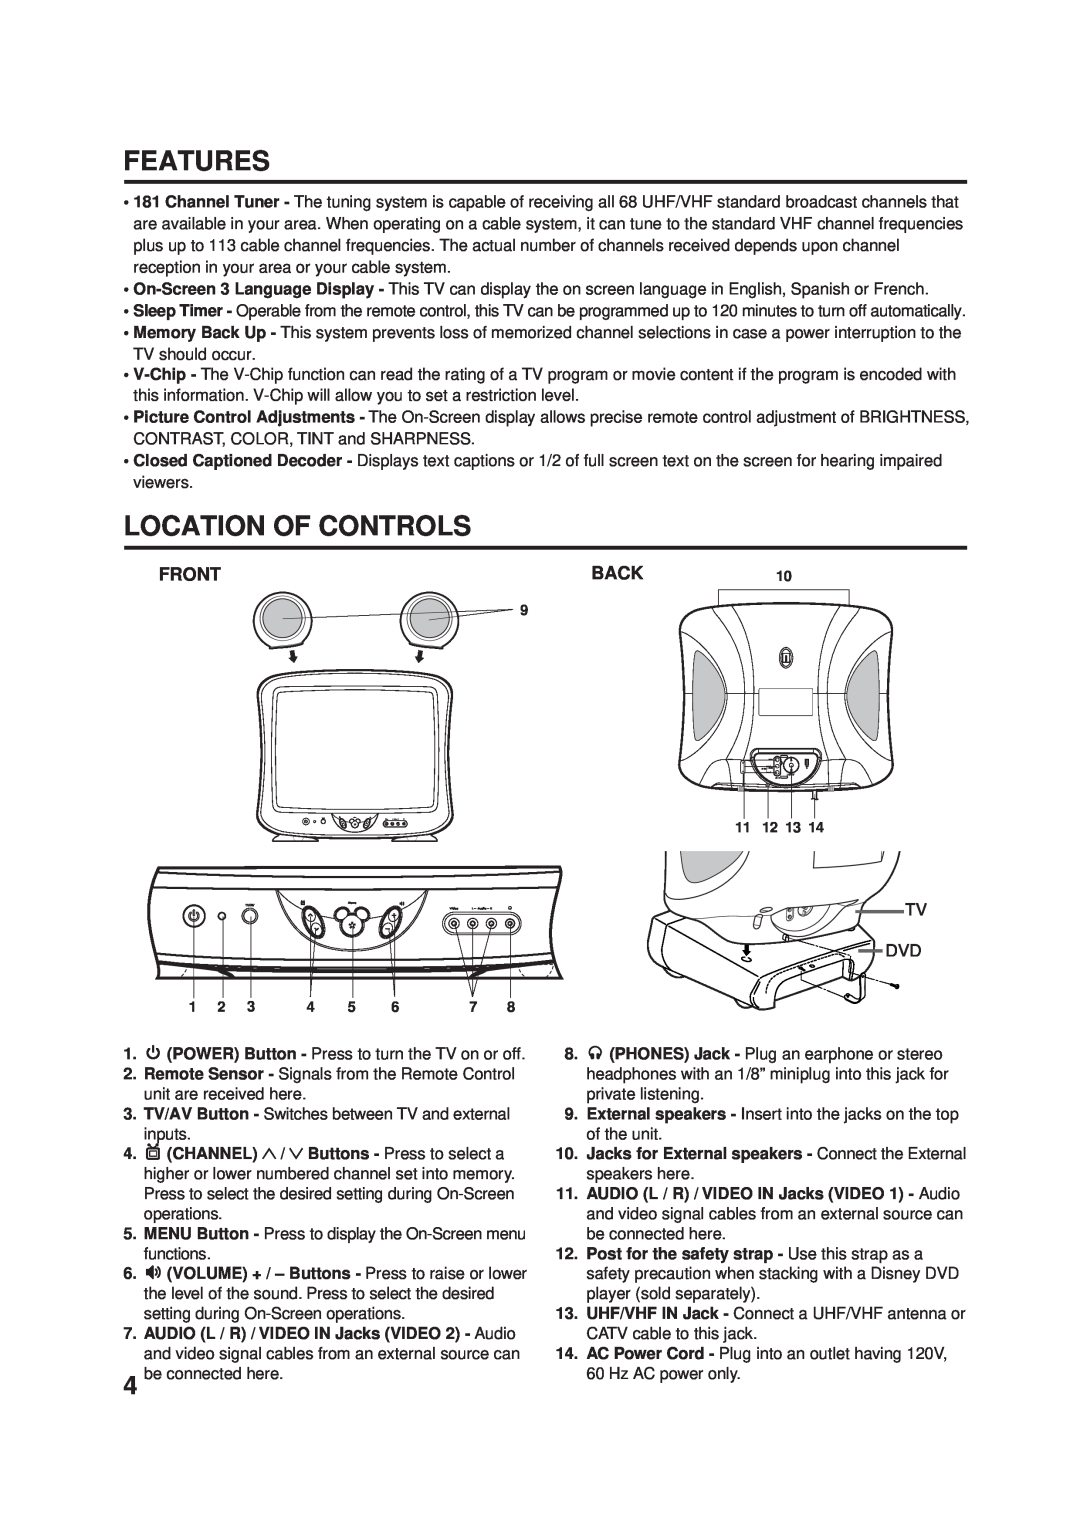 Memorex DT1900-C manual Features, Location Of Controls, Front, Back, POWER Button - Press to turn the TV on or off 